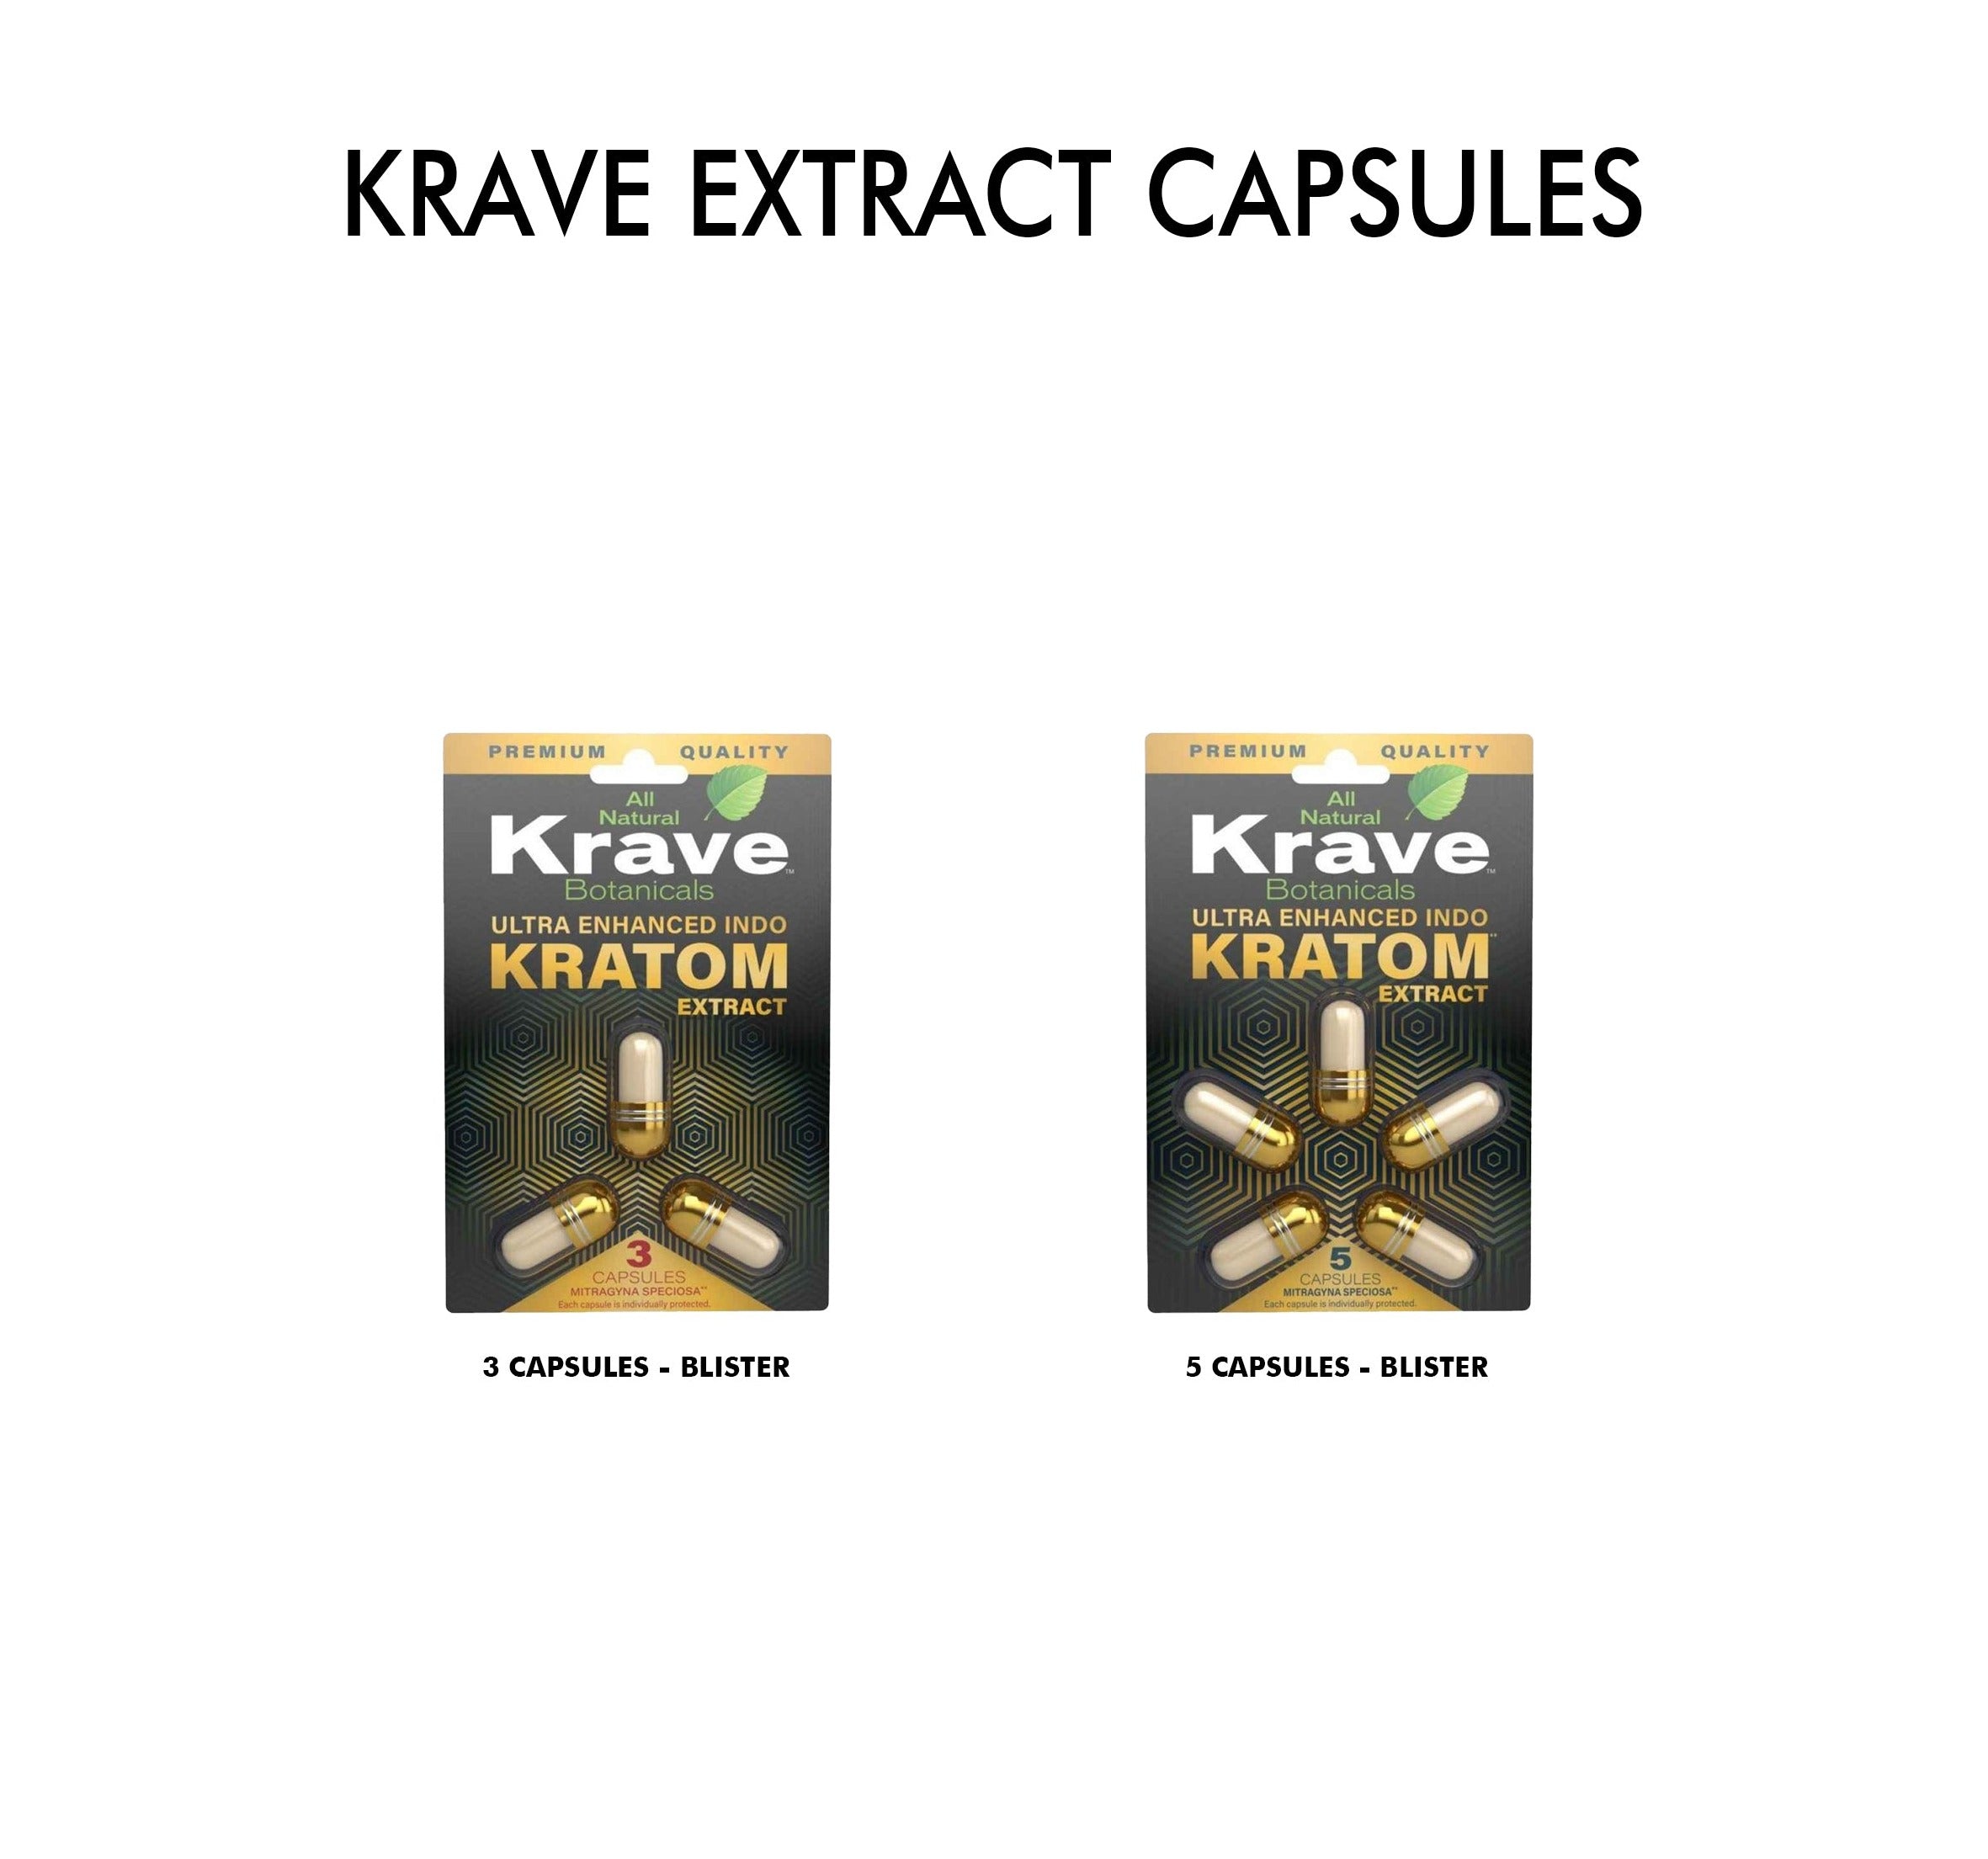 krave Extract Capsules